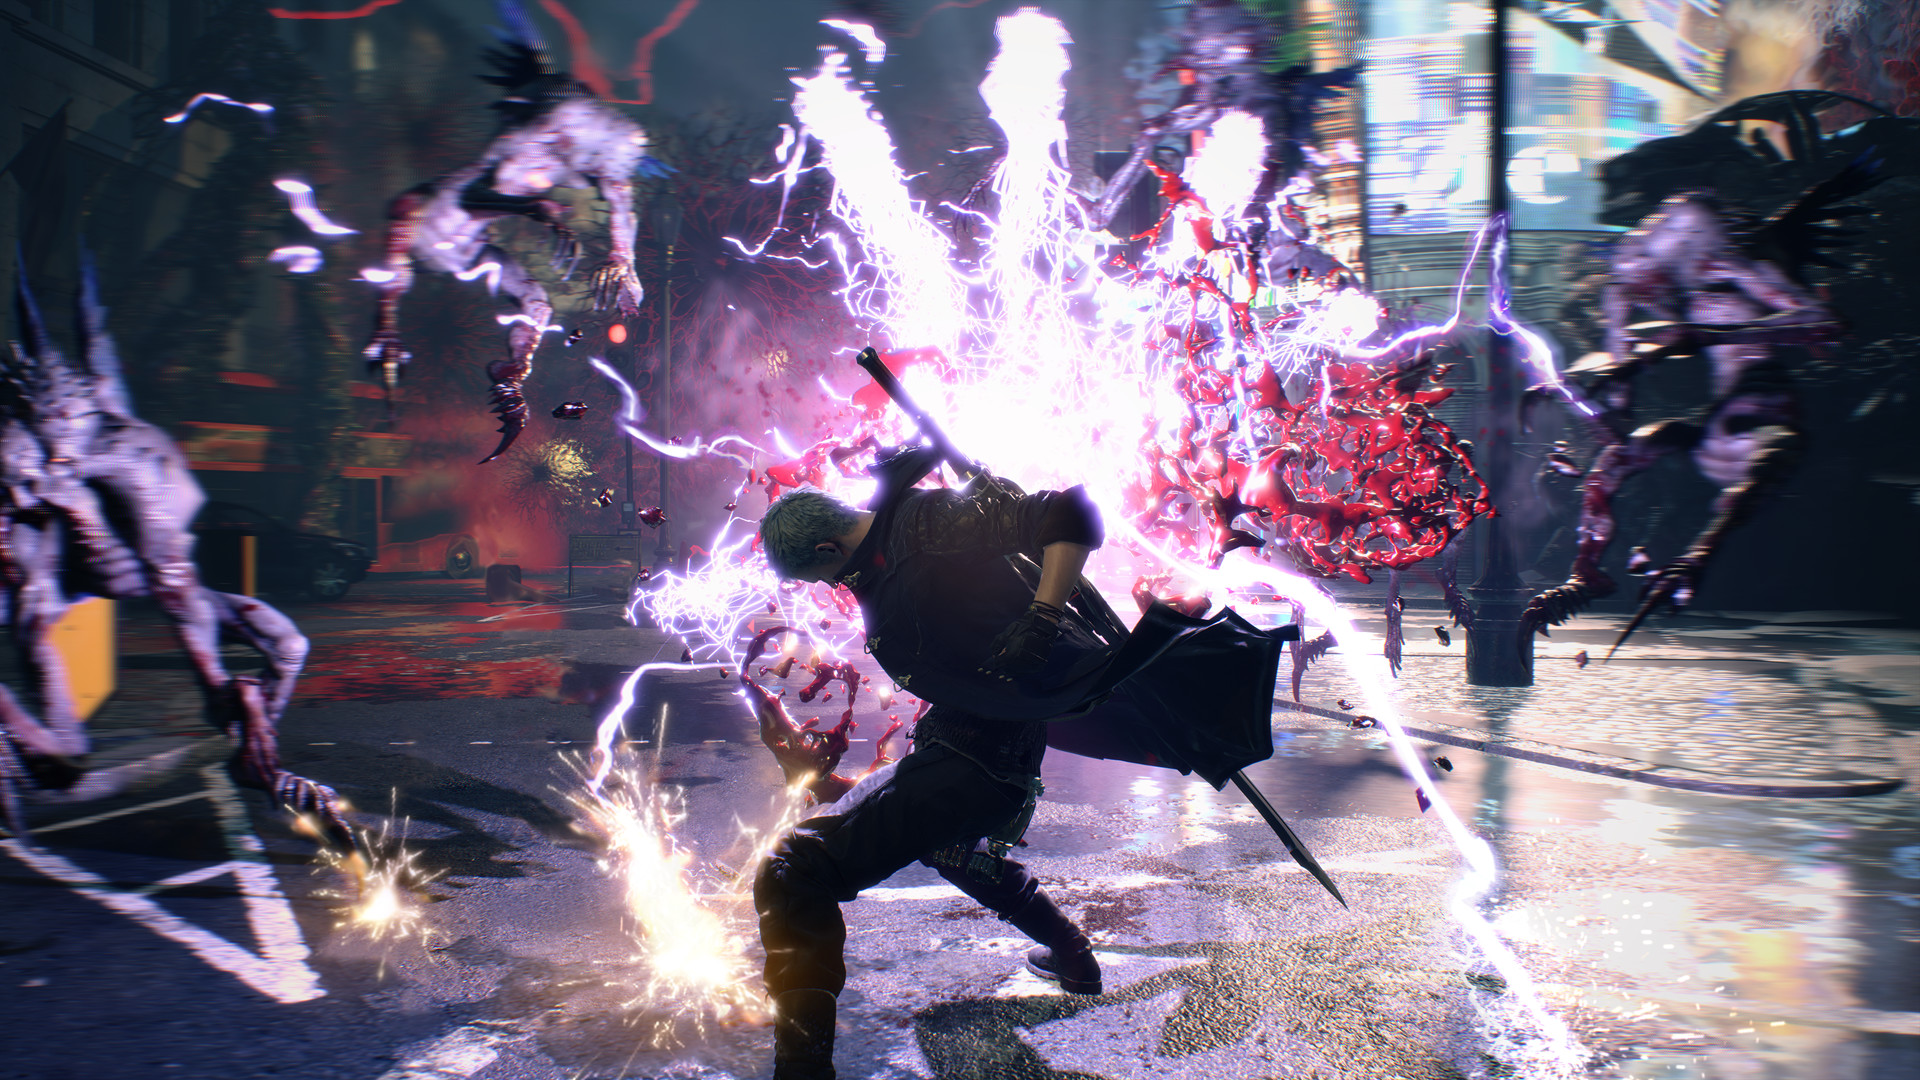 devil may cry 5 wallpaper,street dance,event,fictional character,duel,sparkler